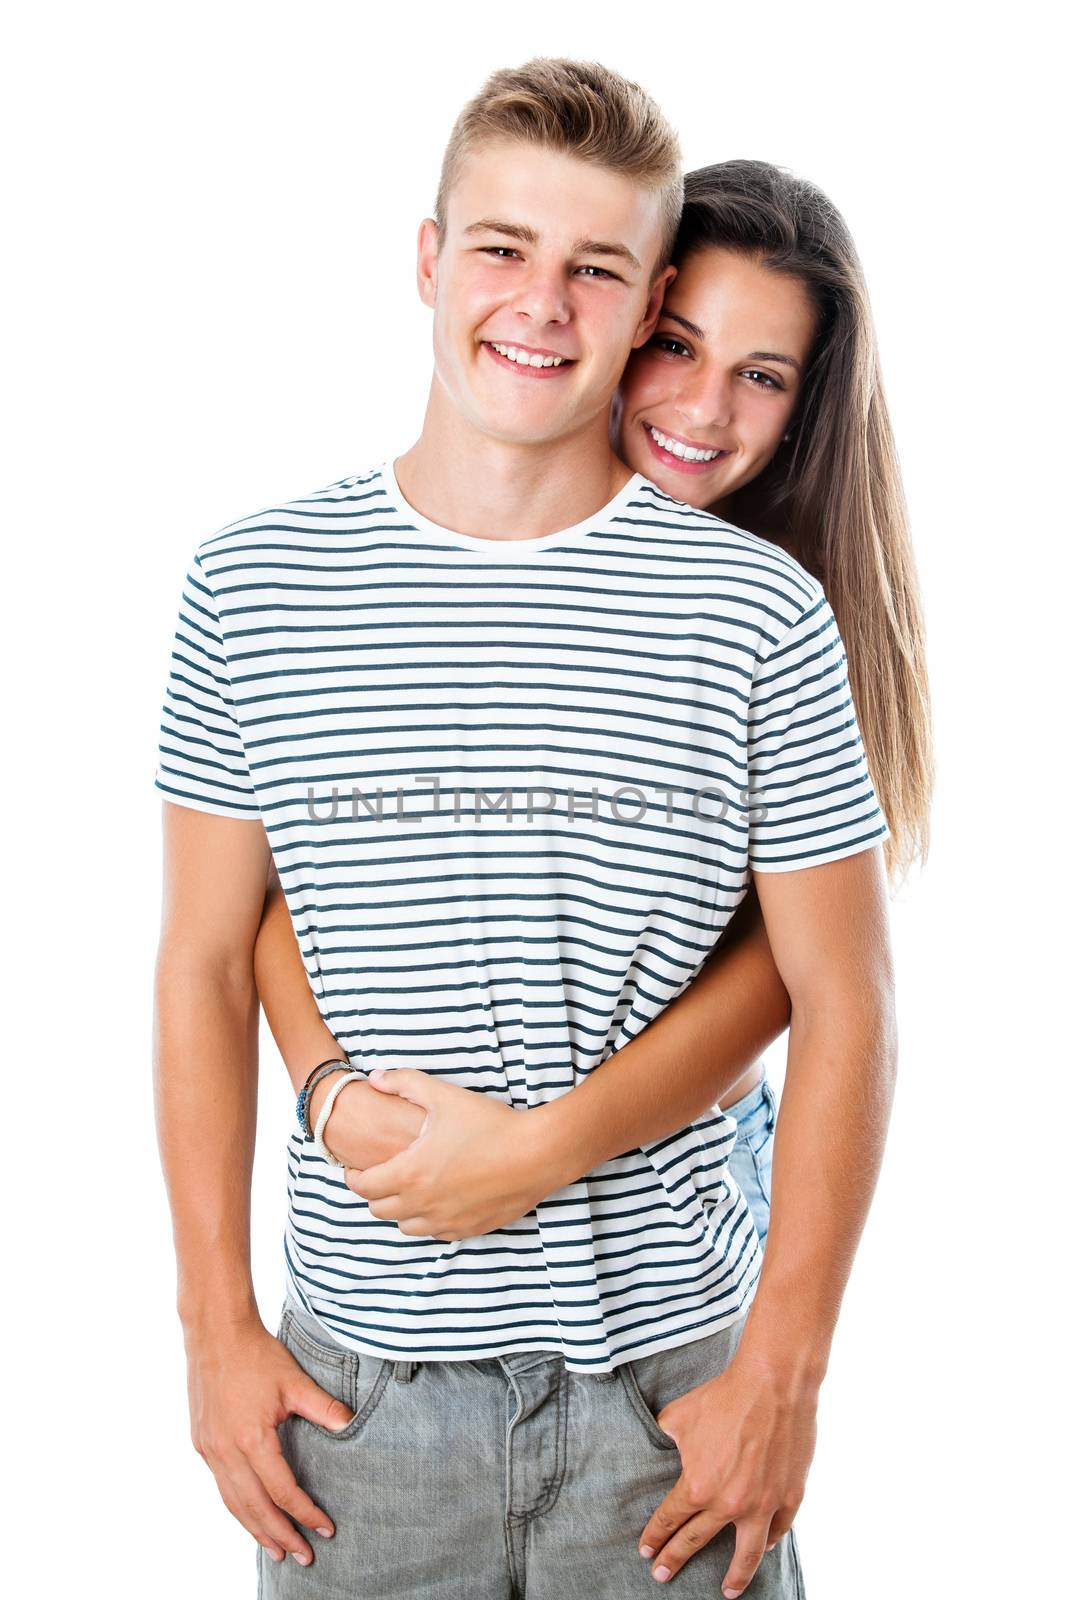 Close up portrait of handsome teen boy with girlfriend embracing from behind.Isolated on white background.